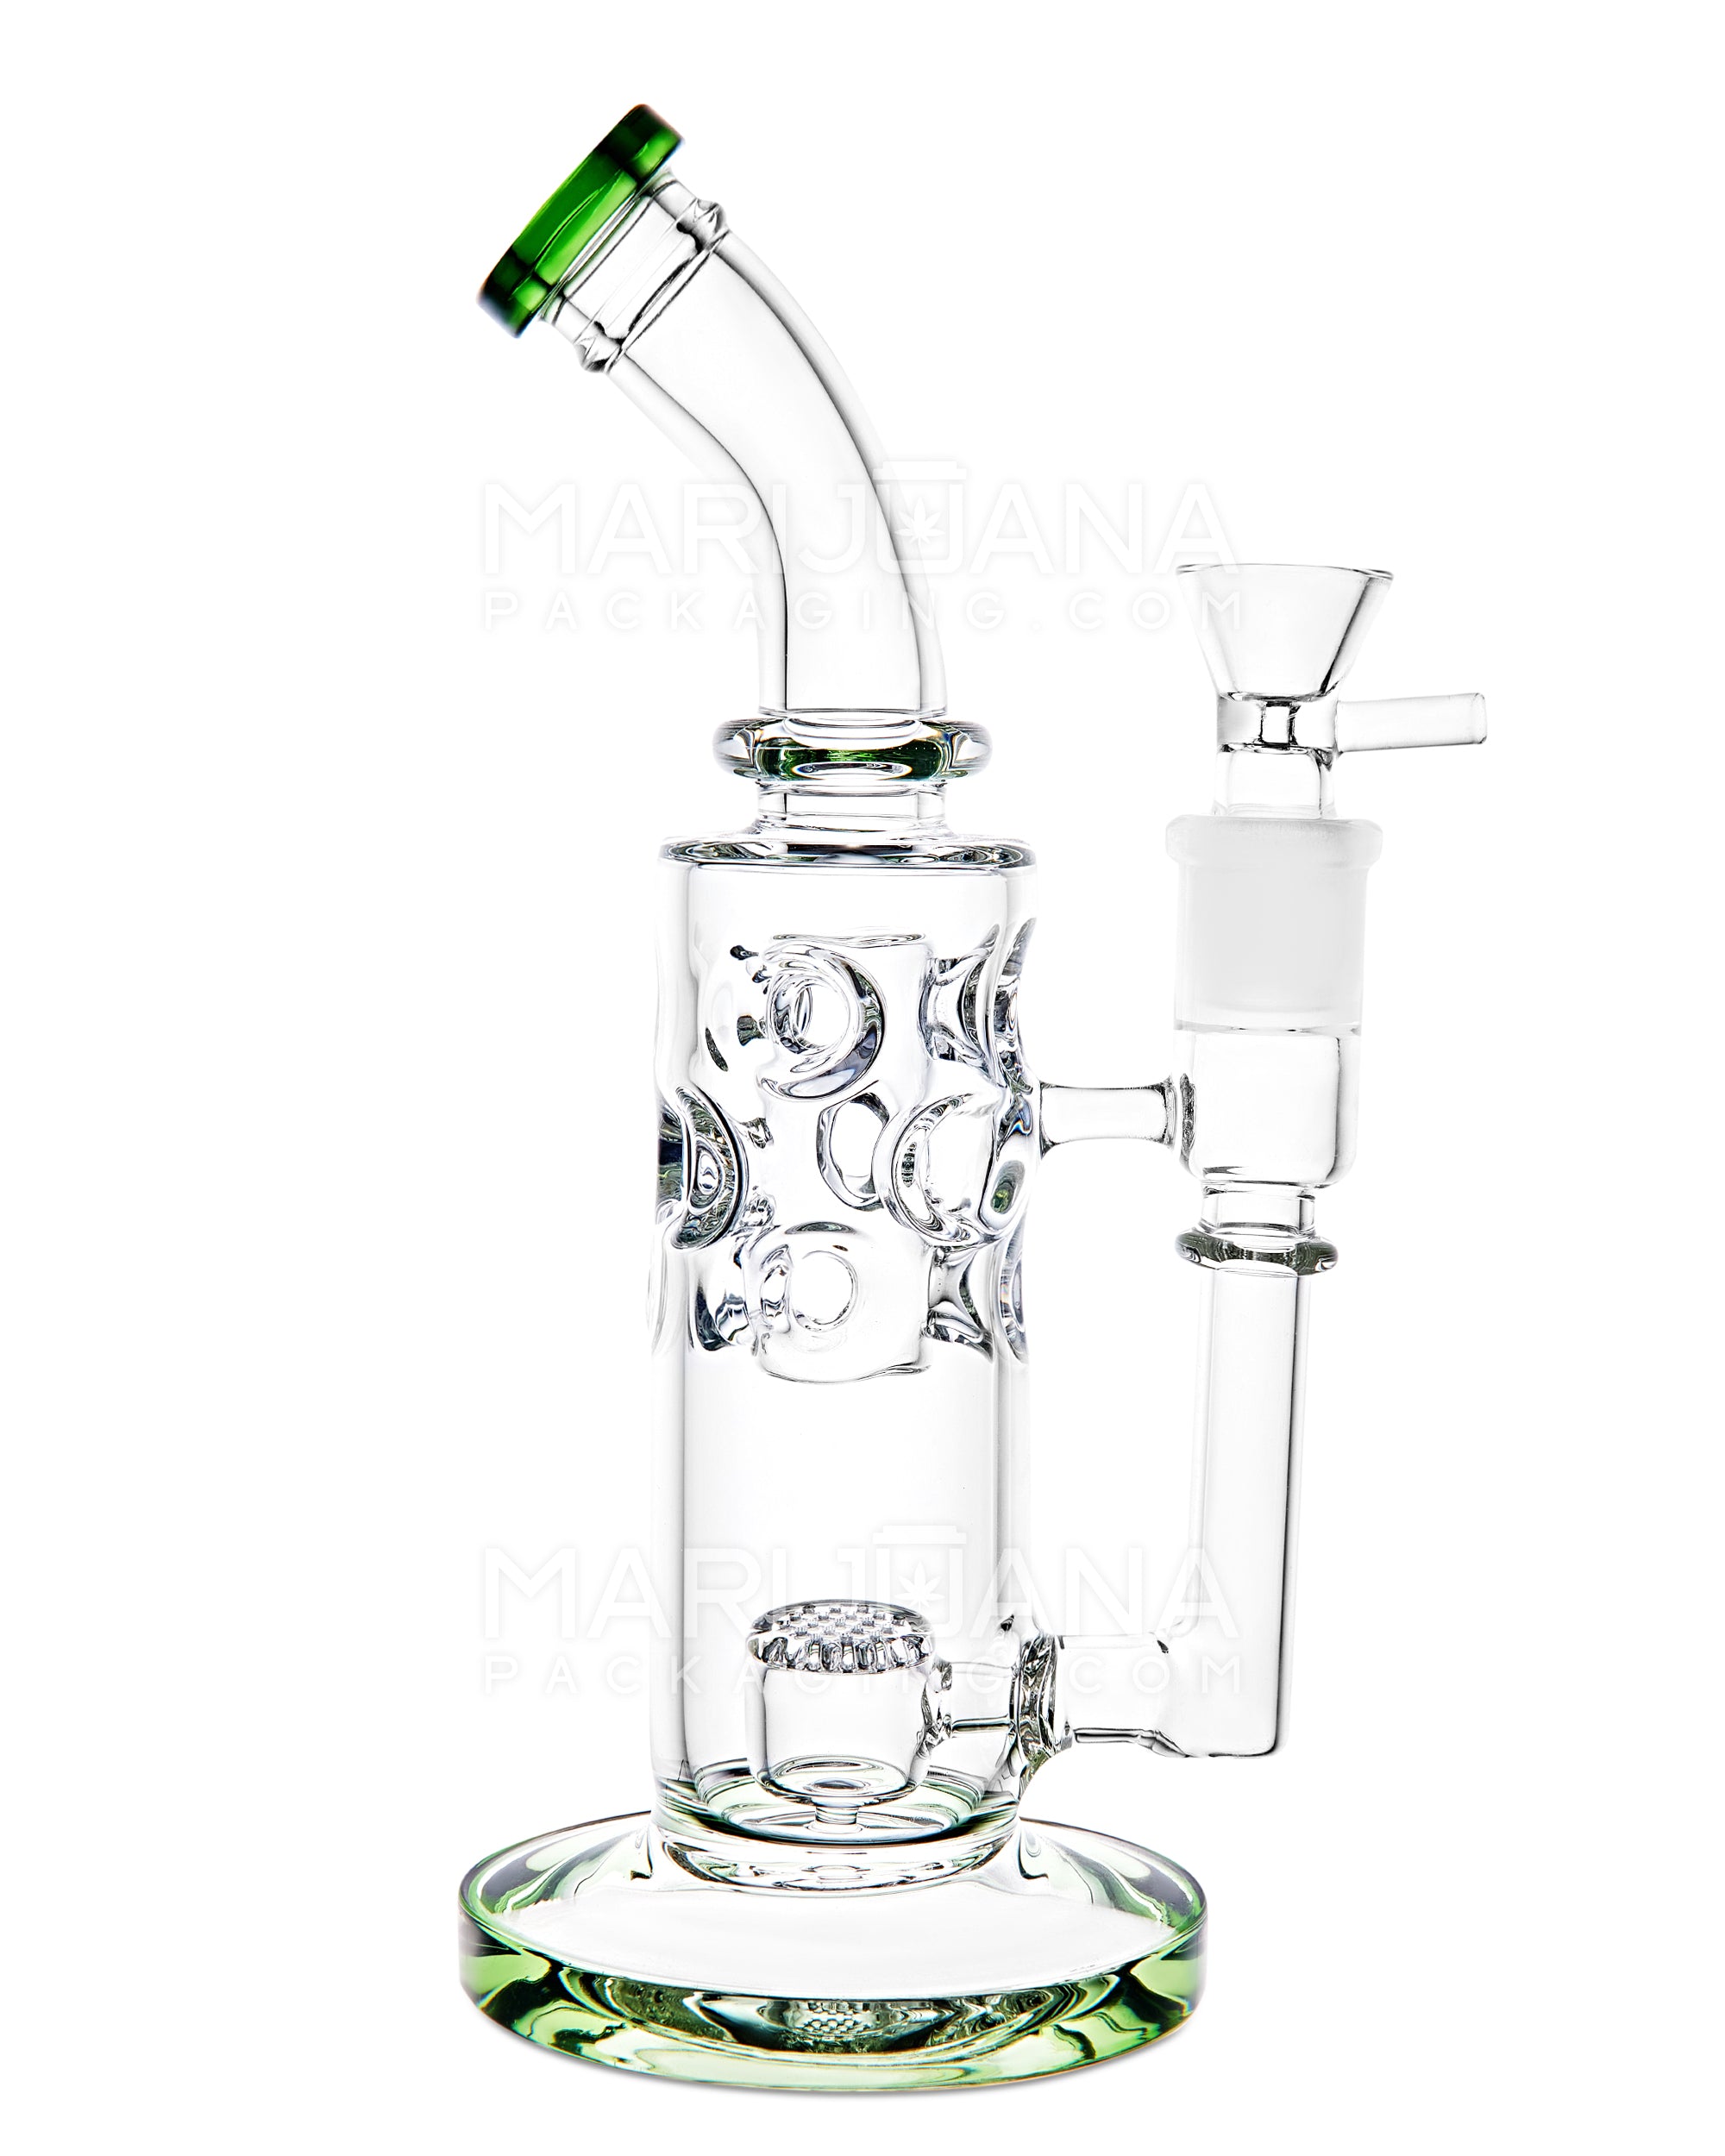 Bent Neck Honeycomb Perc Thick Glass Water Pipe w/ Ice Catcher | 10in Tall - 18mm Bowl - Green - 1